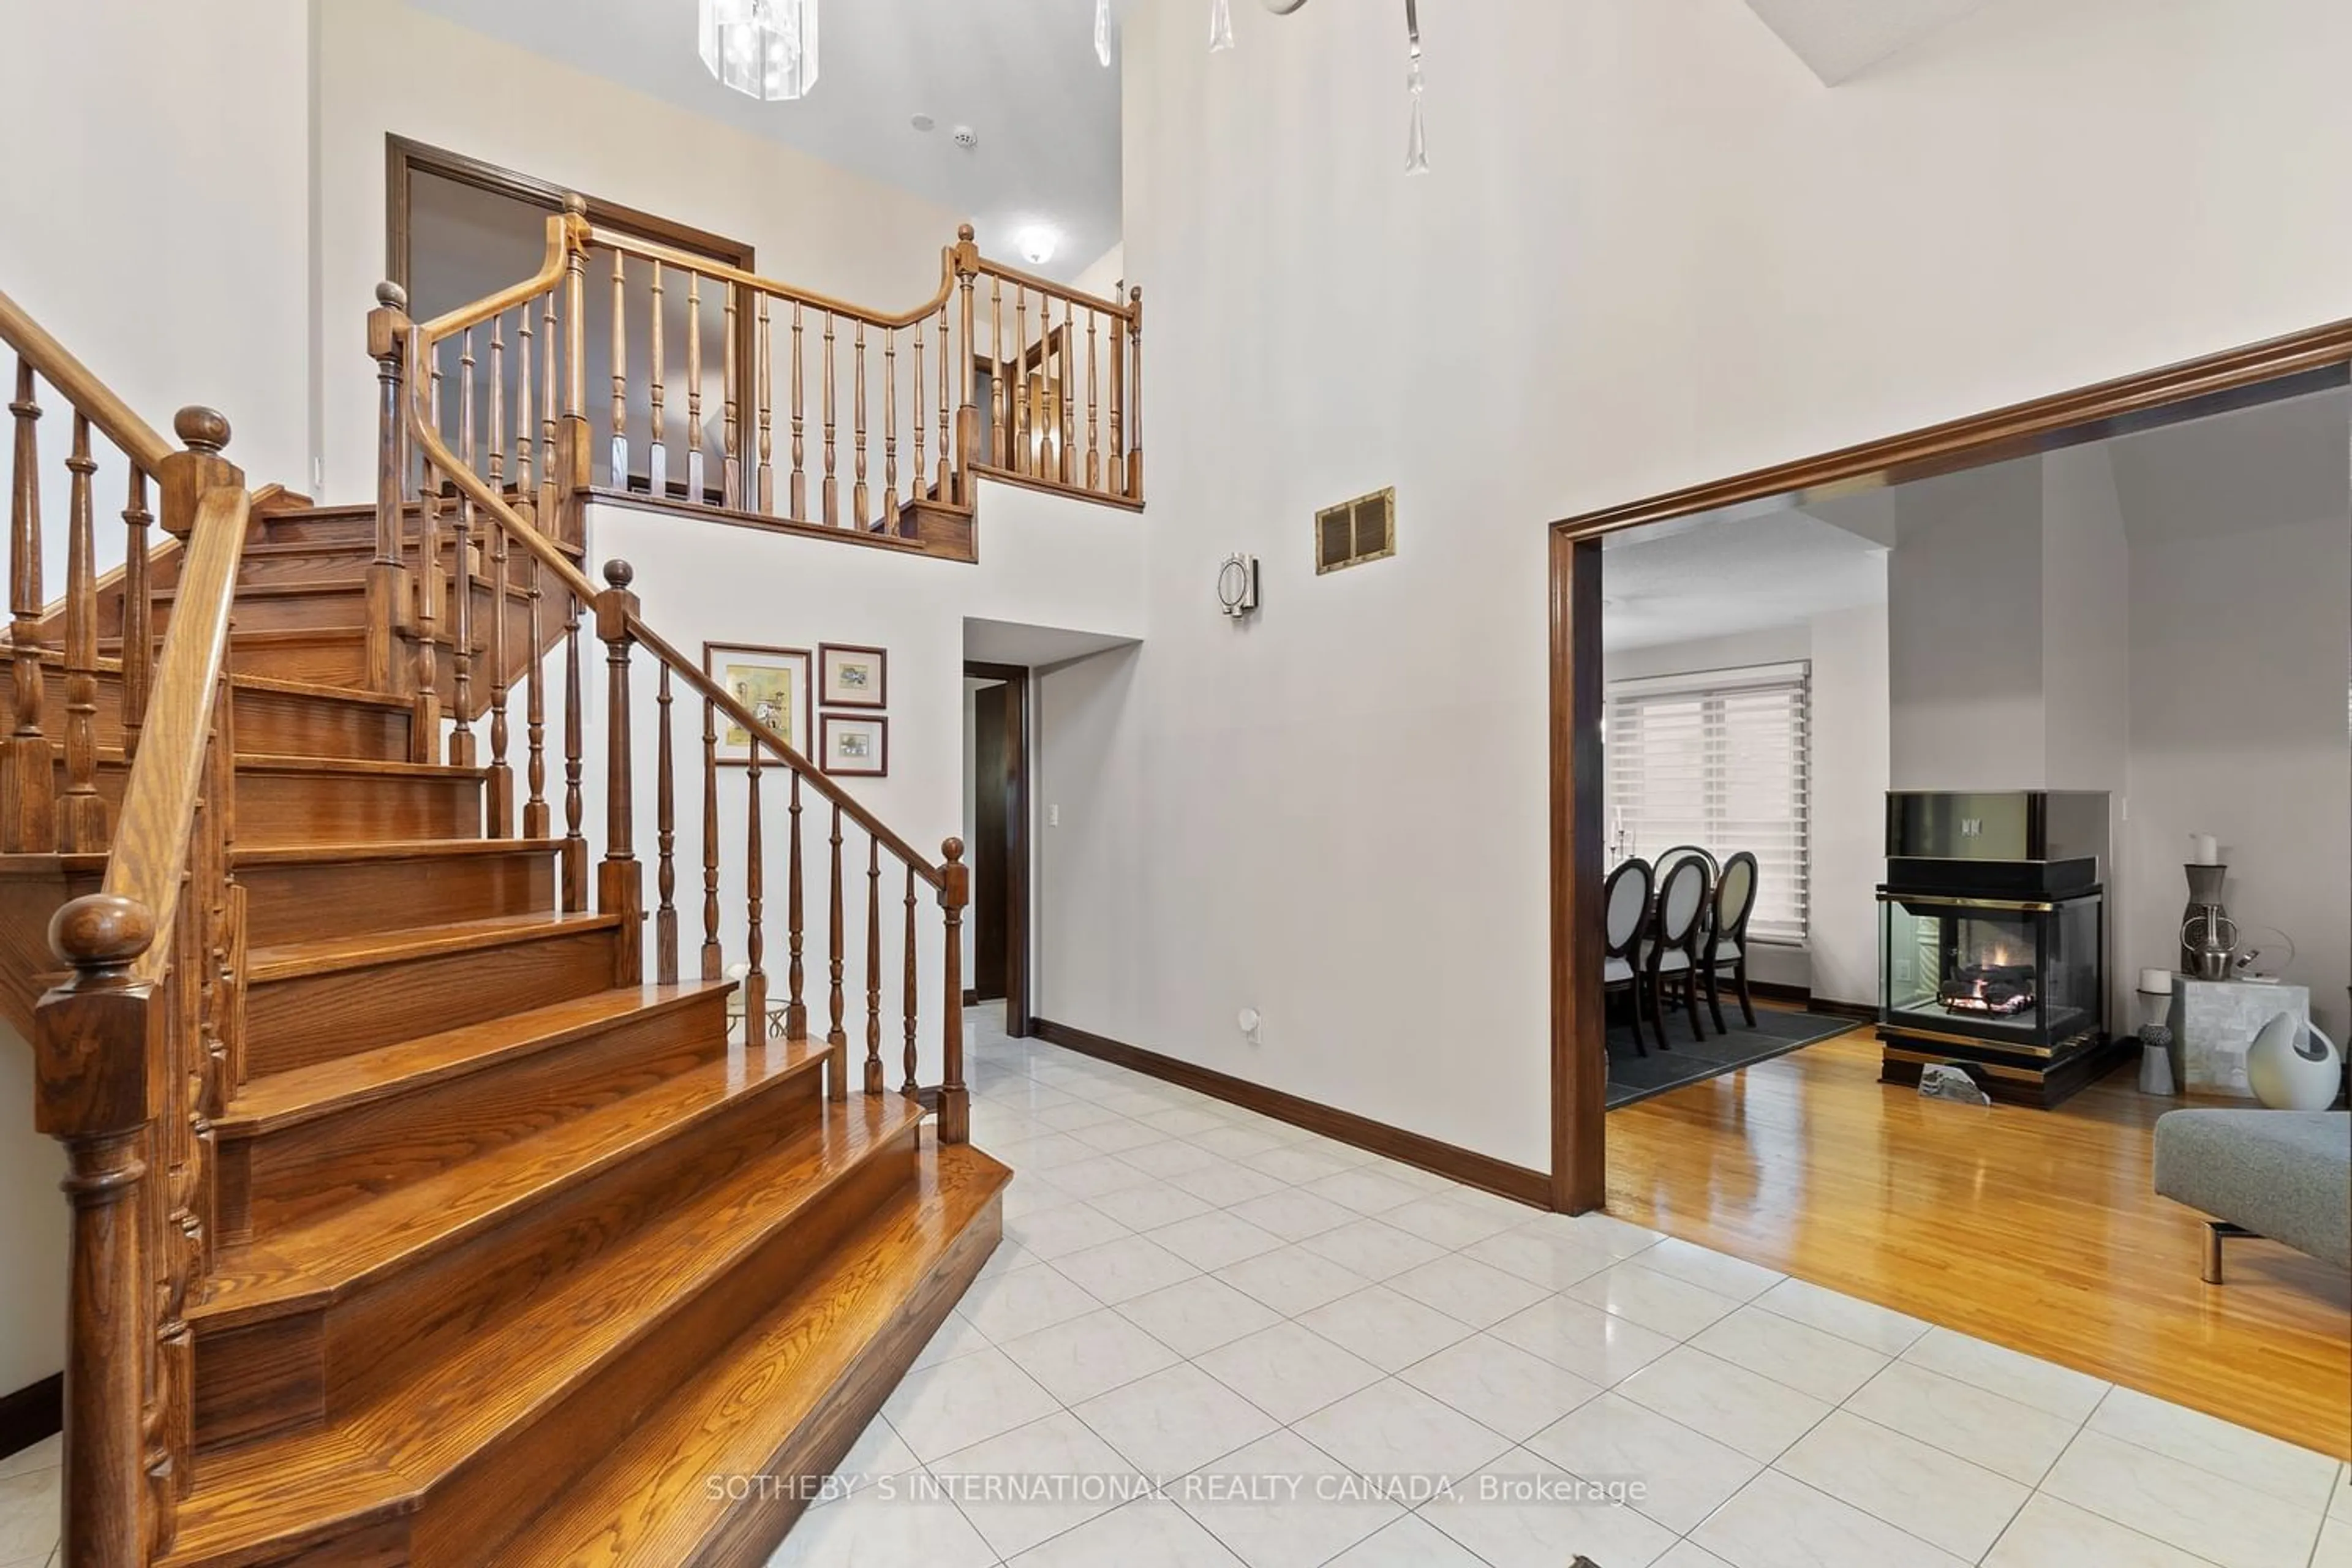 Indoor foyer for 19 Southgate Circ, St. Catharines Ontario L2T 4B6